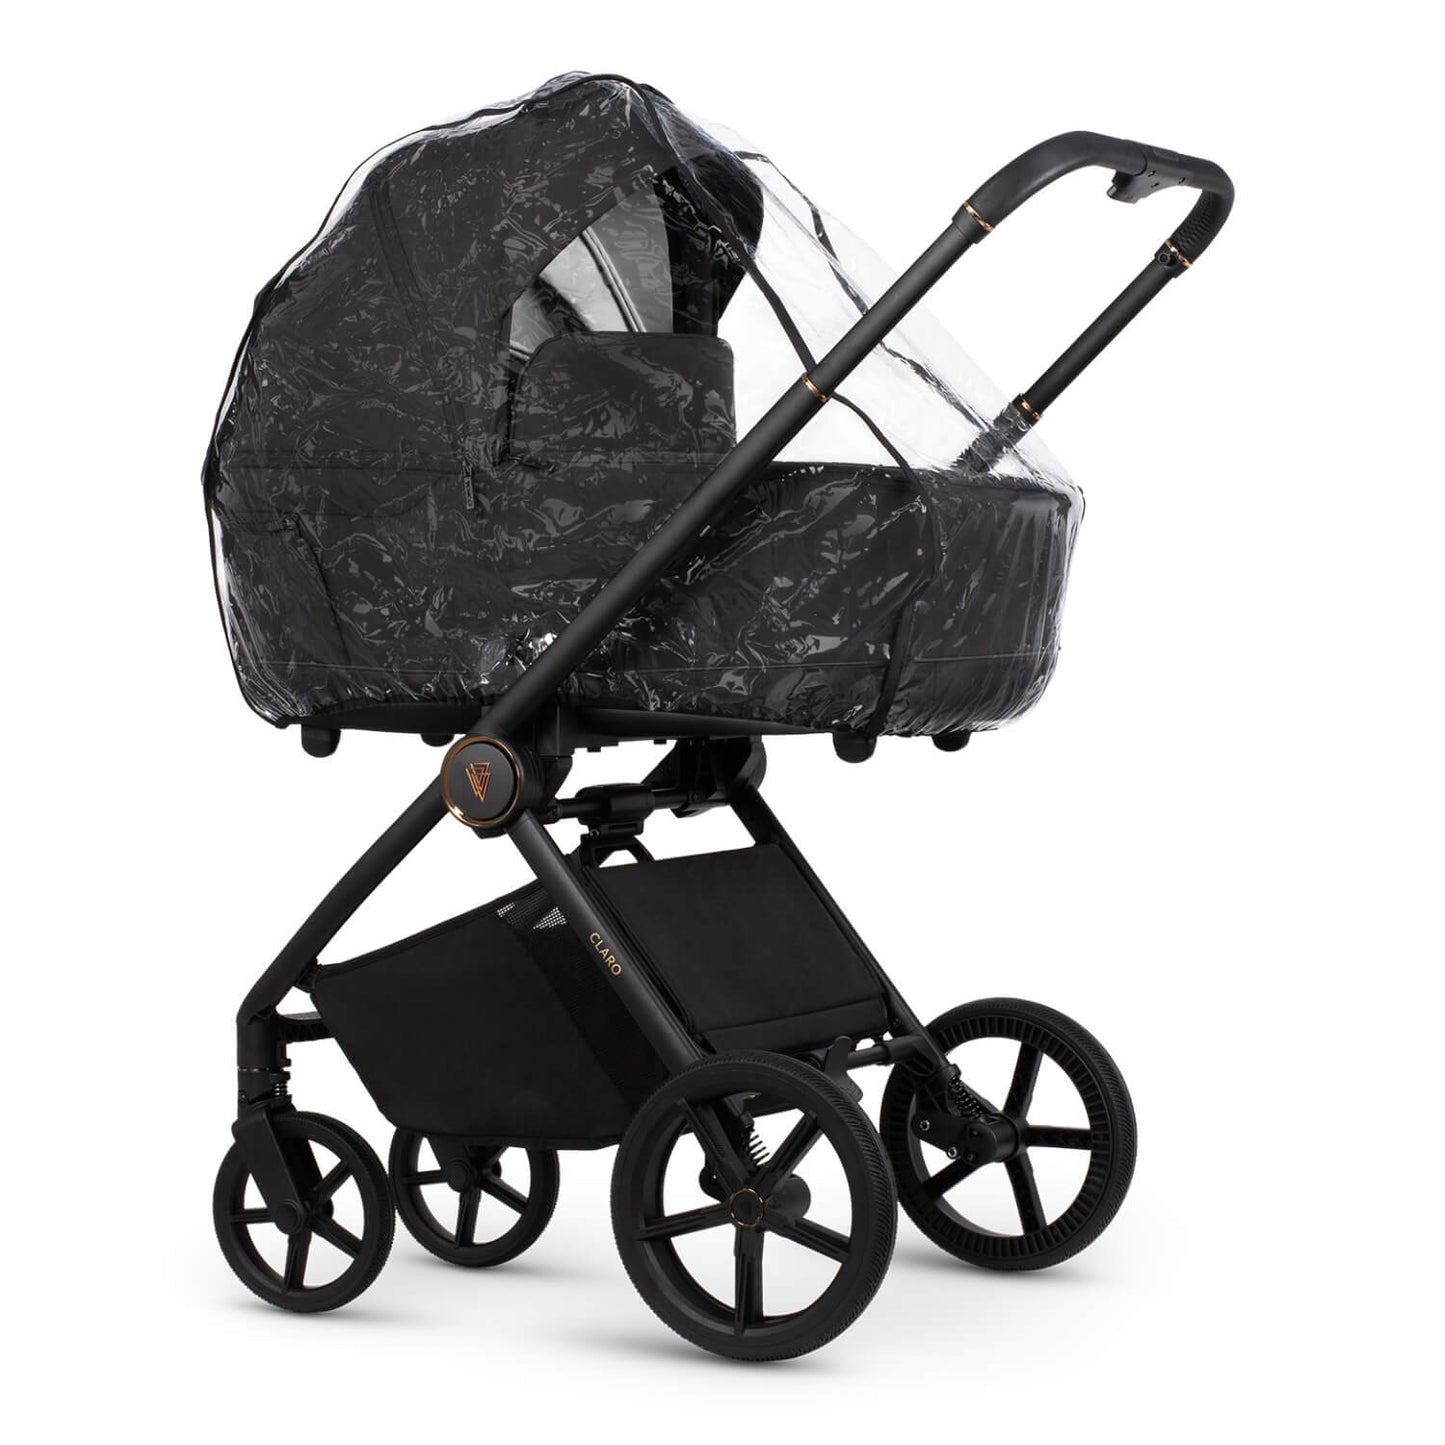 Venicci Claro Pram in Noir black colour with the included clear rain cover attached